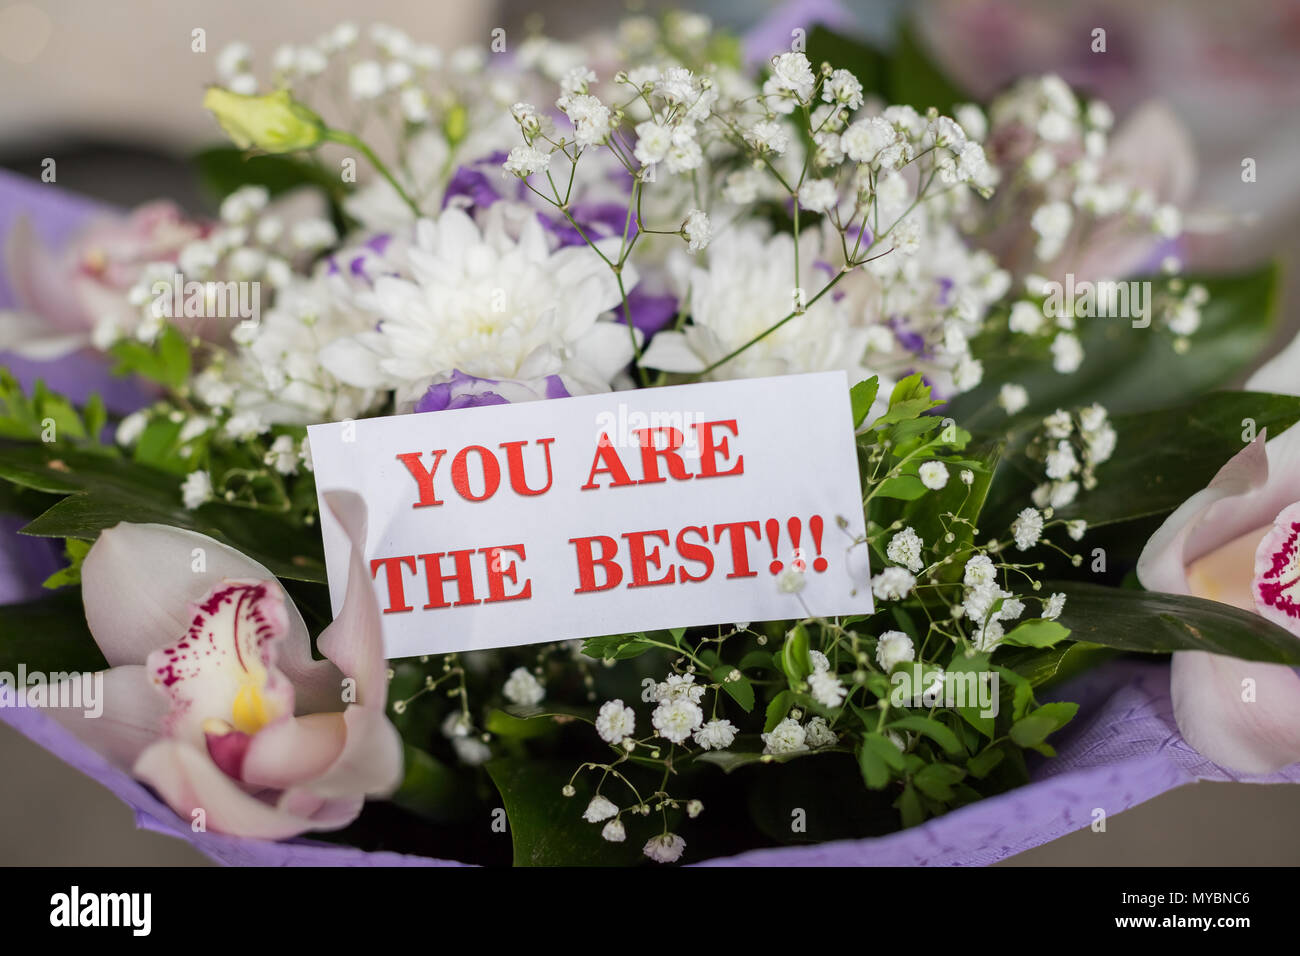 Valentine's day endless love or special occasion concept : beautiful flowers bouquet with orchids. proposal for Marriage. You are the best one. Deep feelings card. Stock Photo